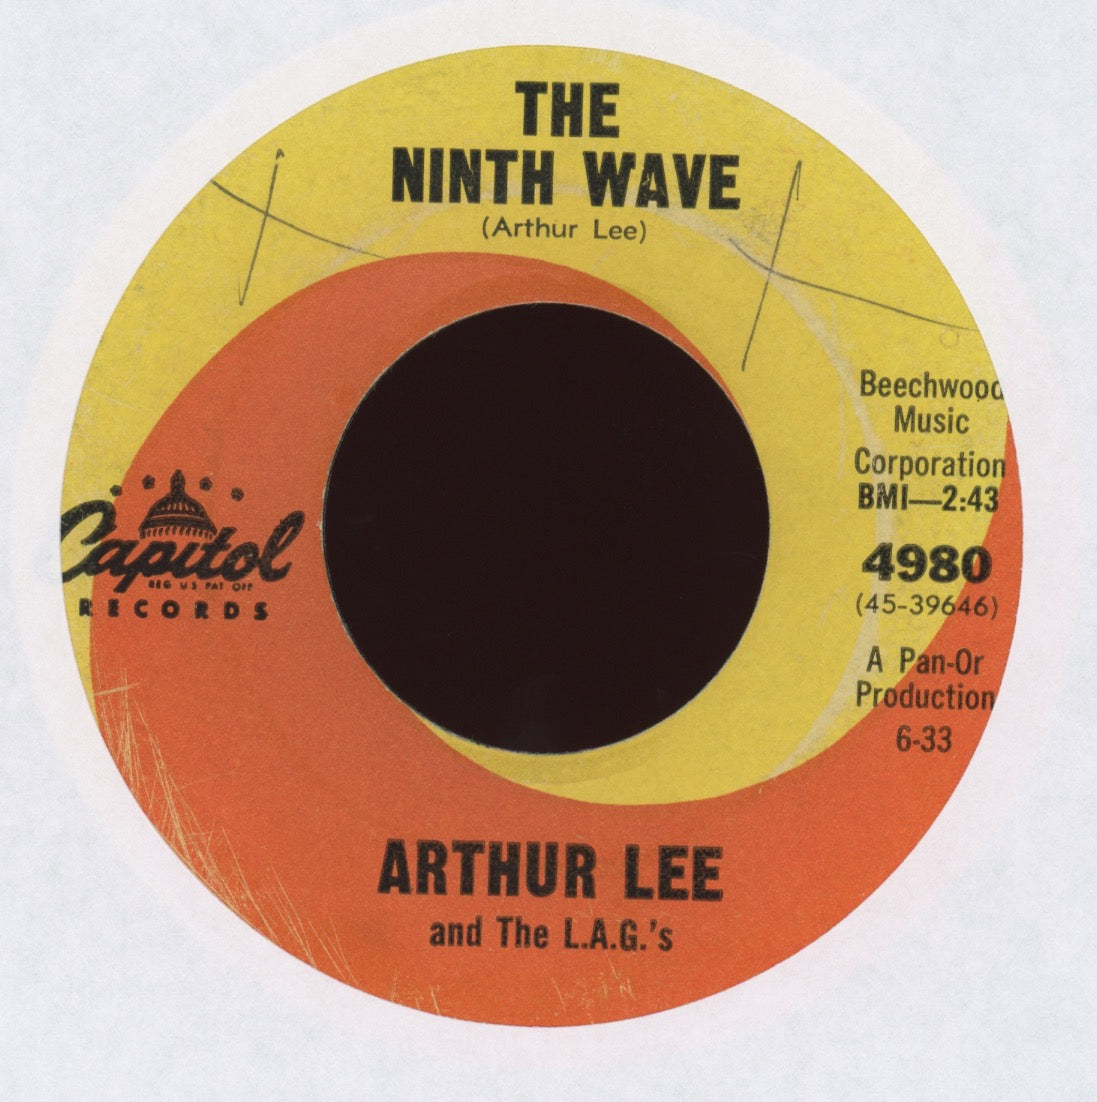 Arthur Lee & The L.A.G.'s - The Ninth Wave / Rumble-Still-Skins on Capitol